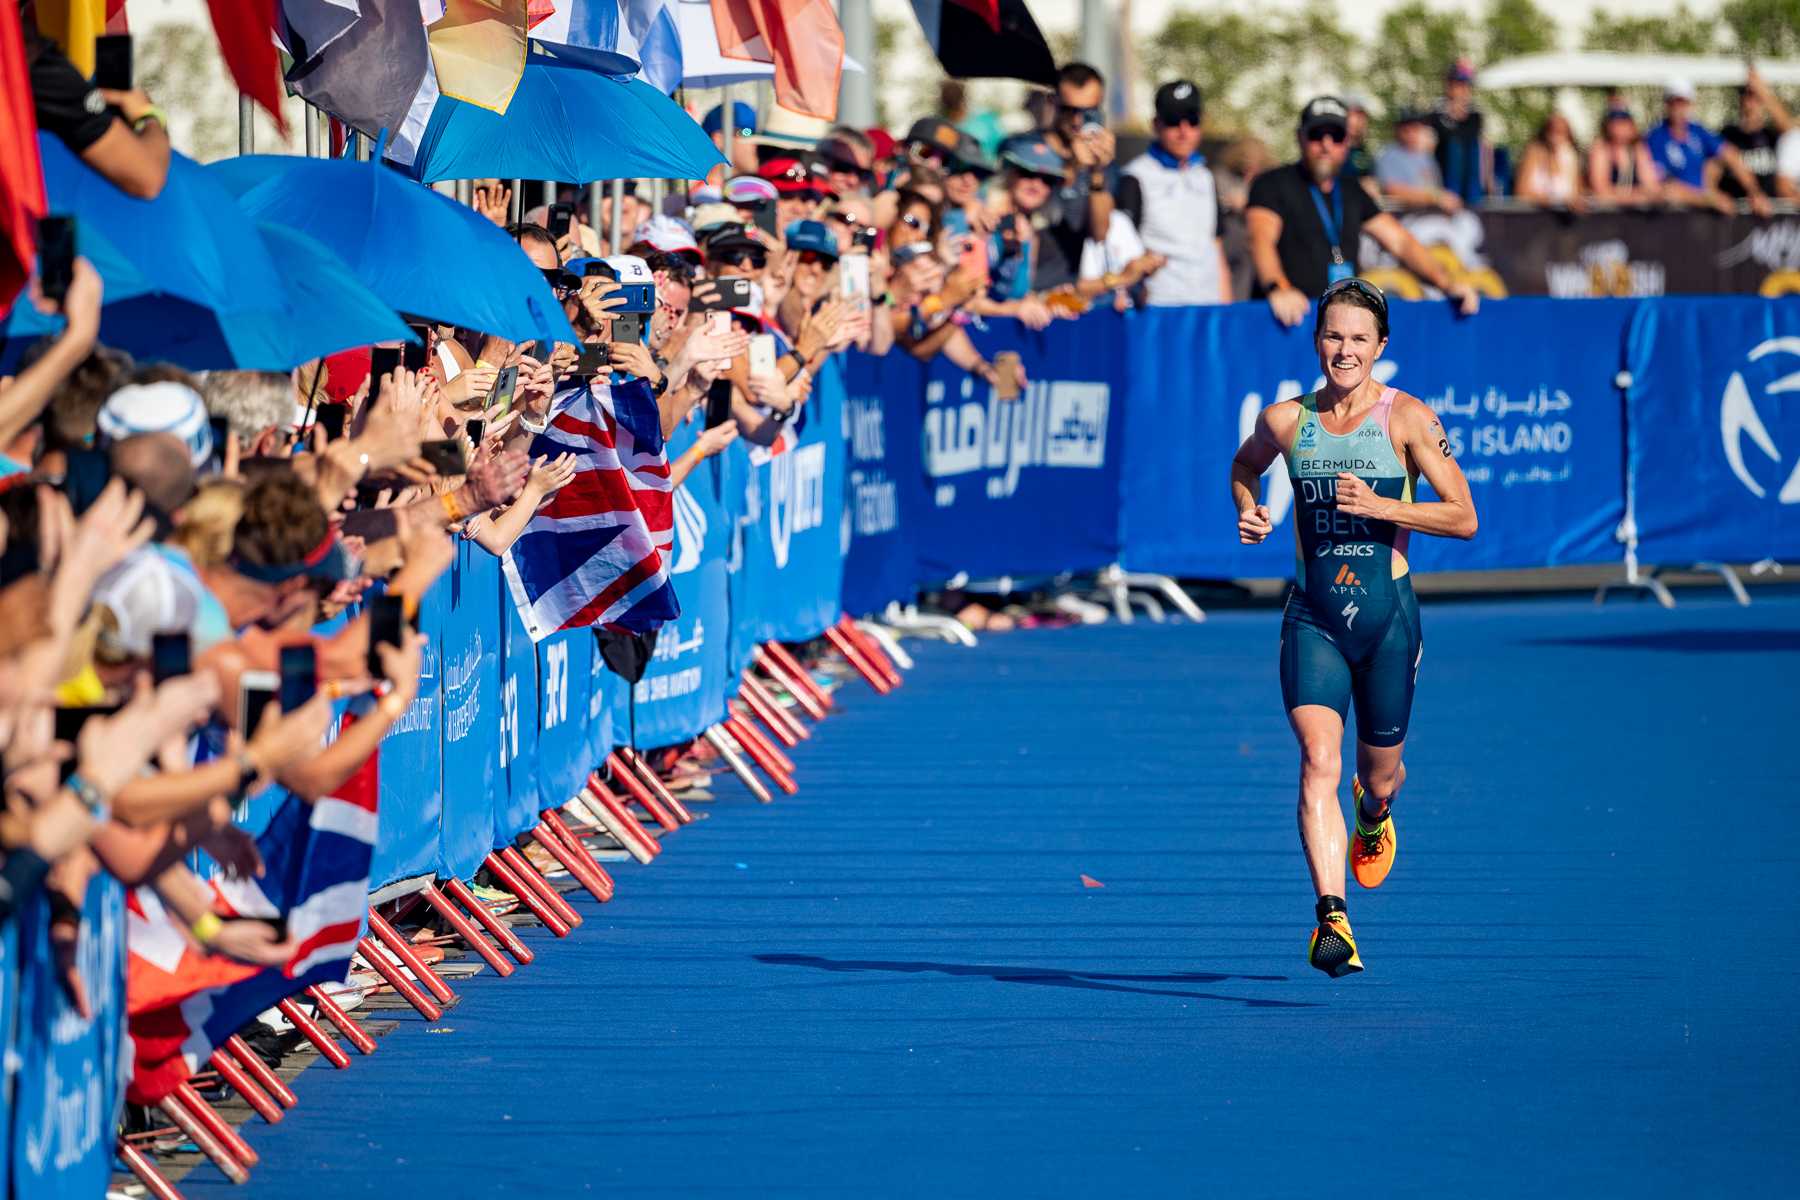 Dazzling Duffy Wins Record Fourth World Triathlon Title After Spectacular Season Finale